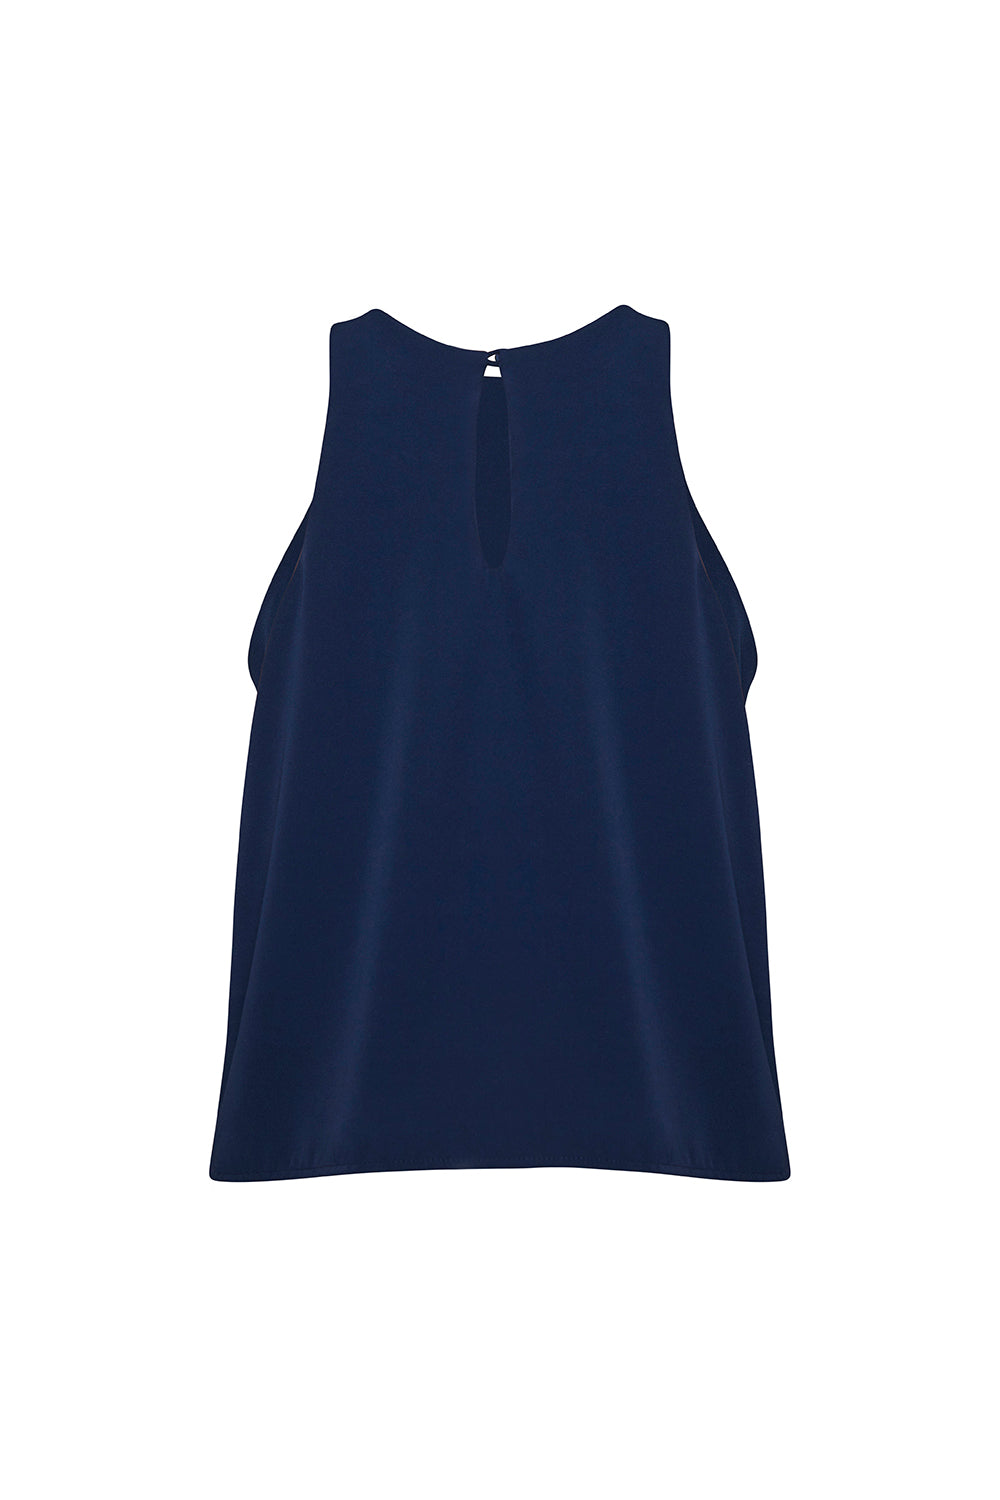 Euforia lily blouse Navy blue